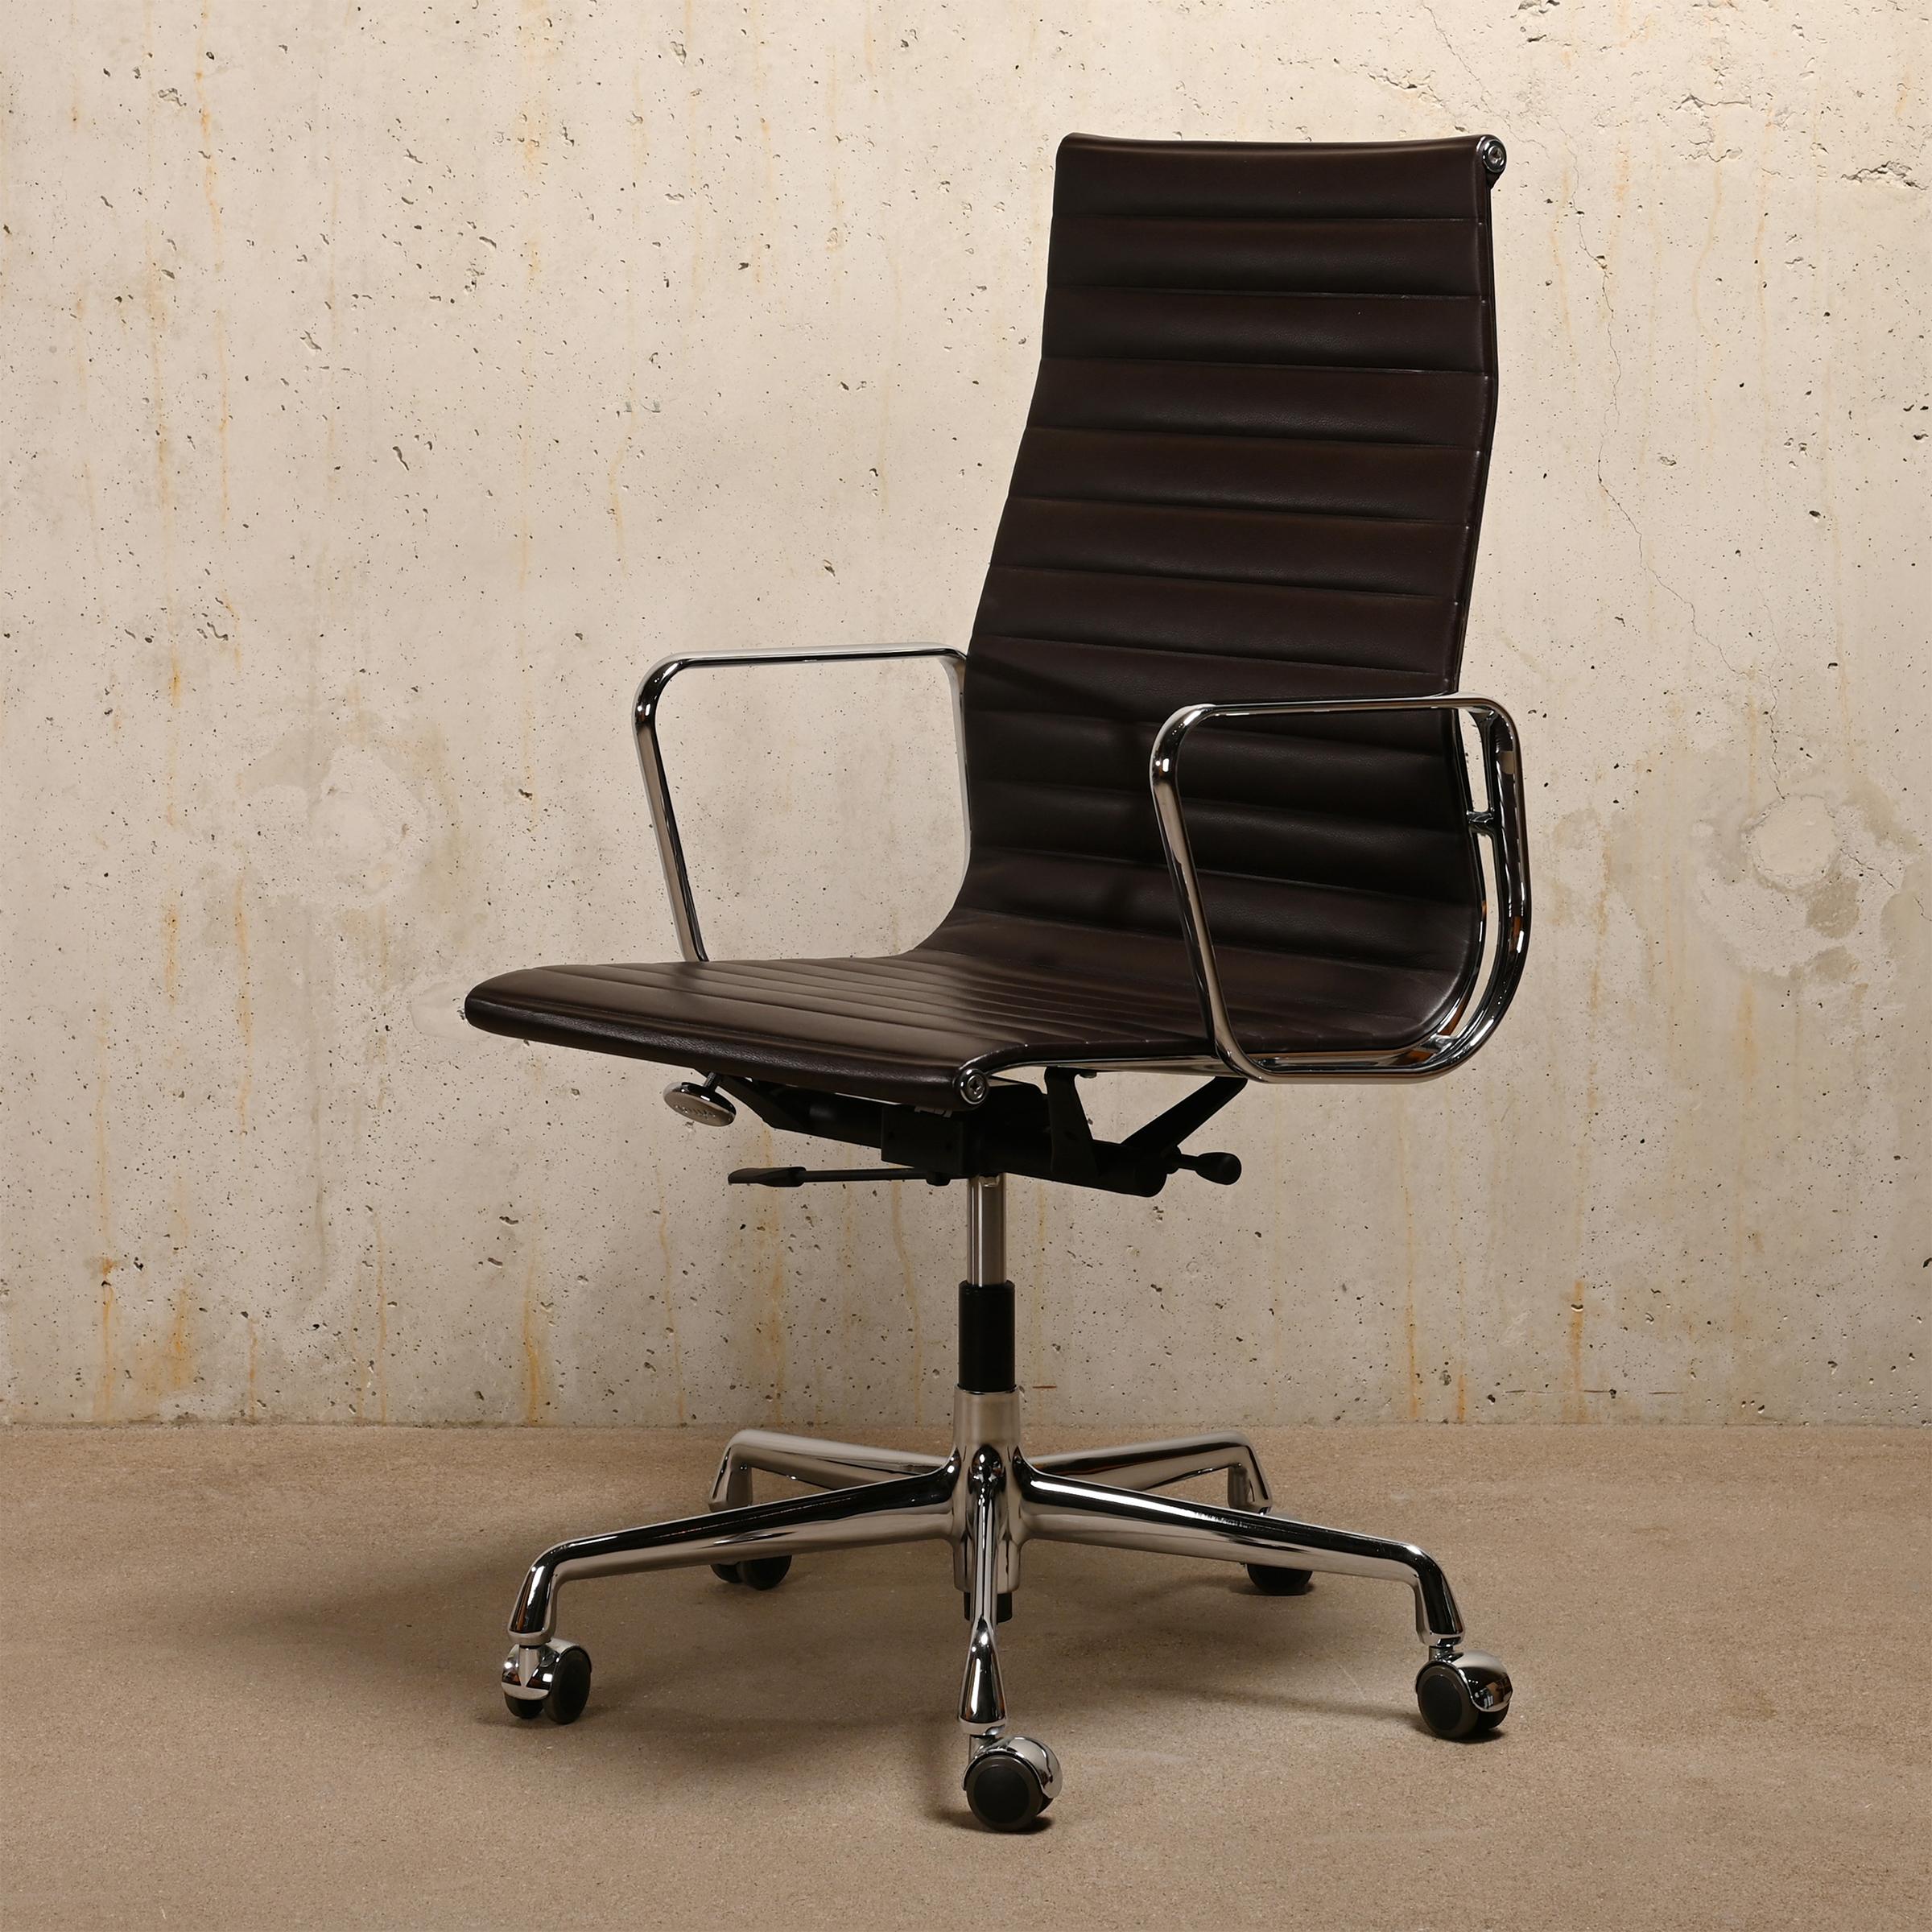 Charles & Ray Eames EA119 Executive Office chair in dark brown leather for Vitra 1